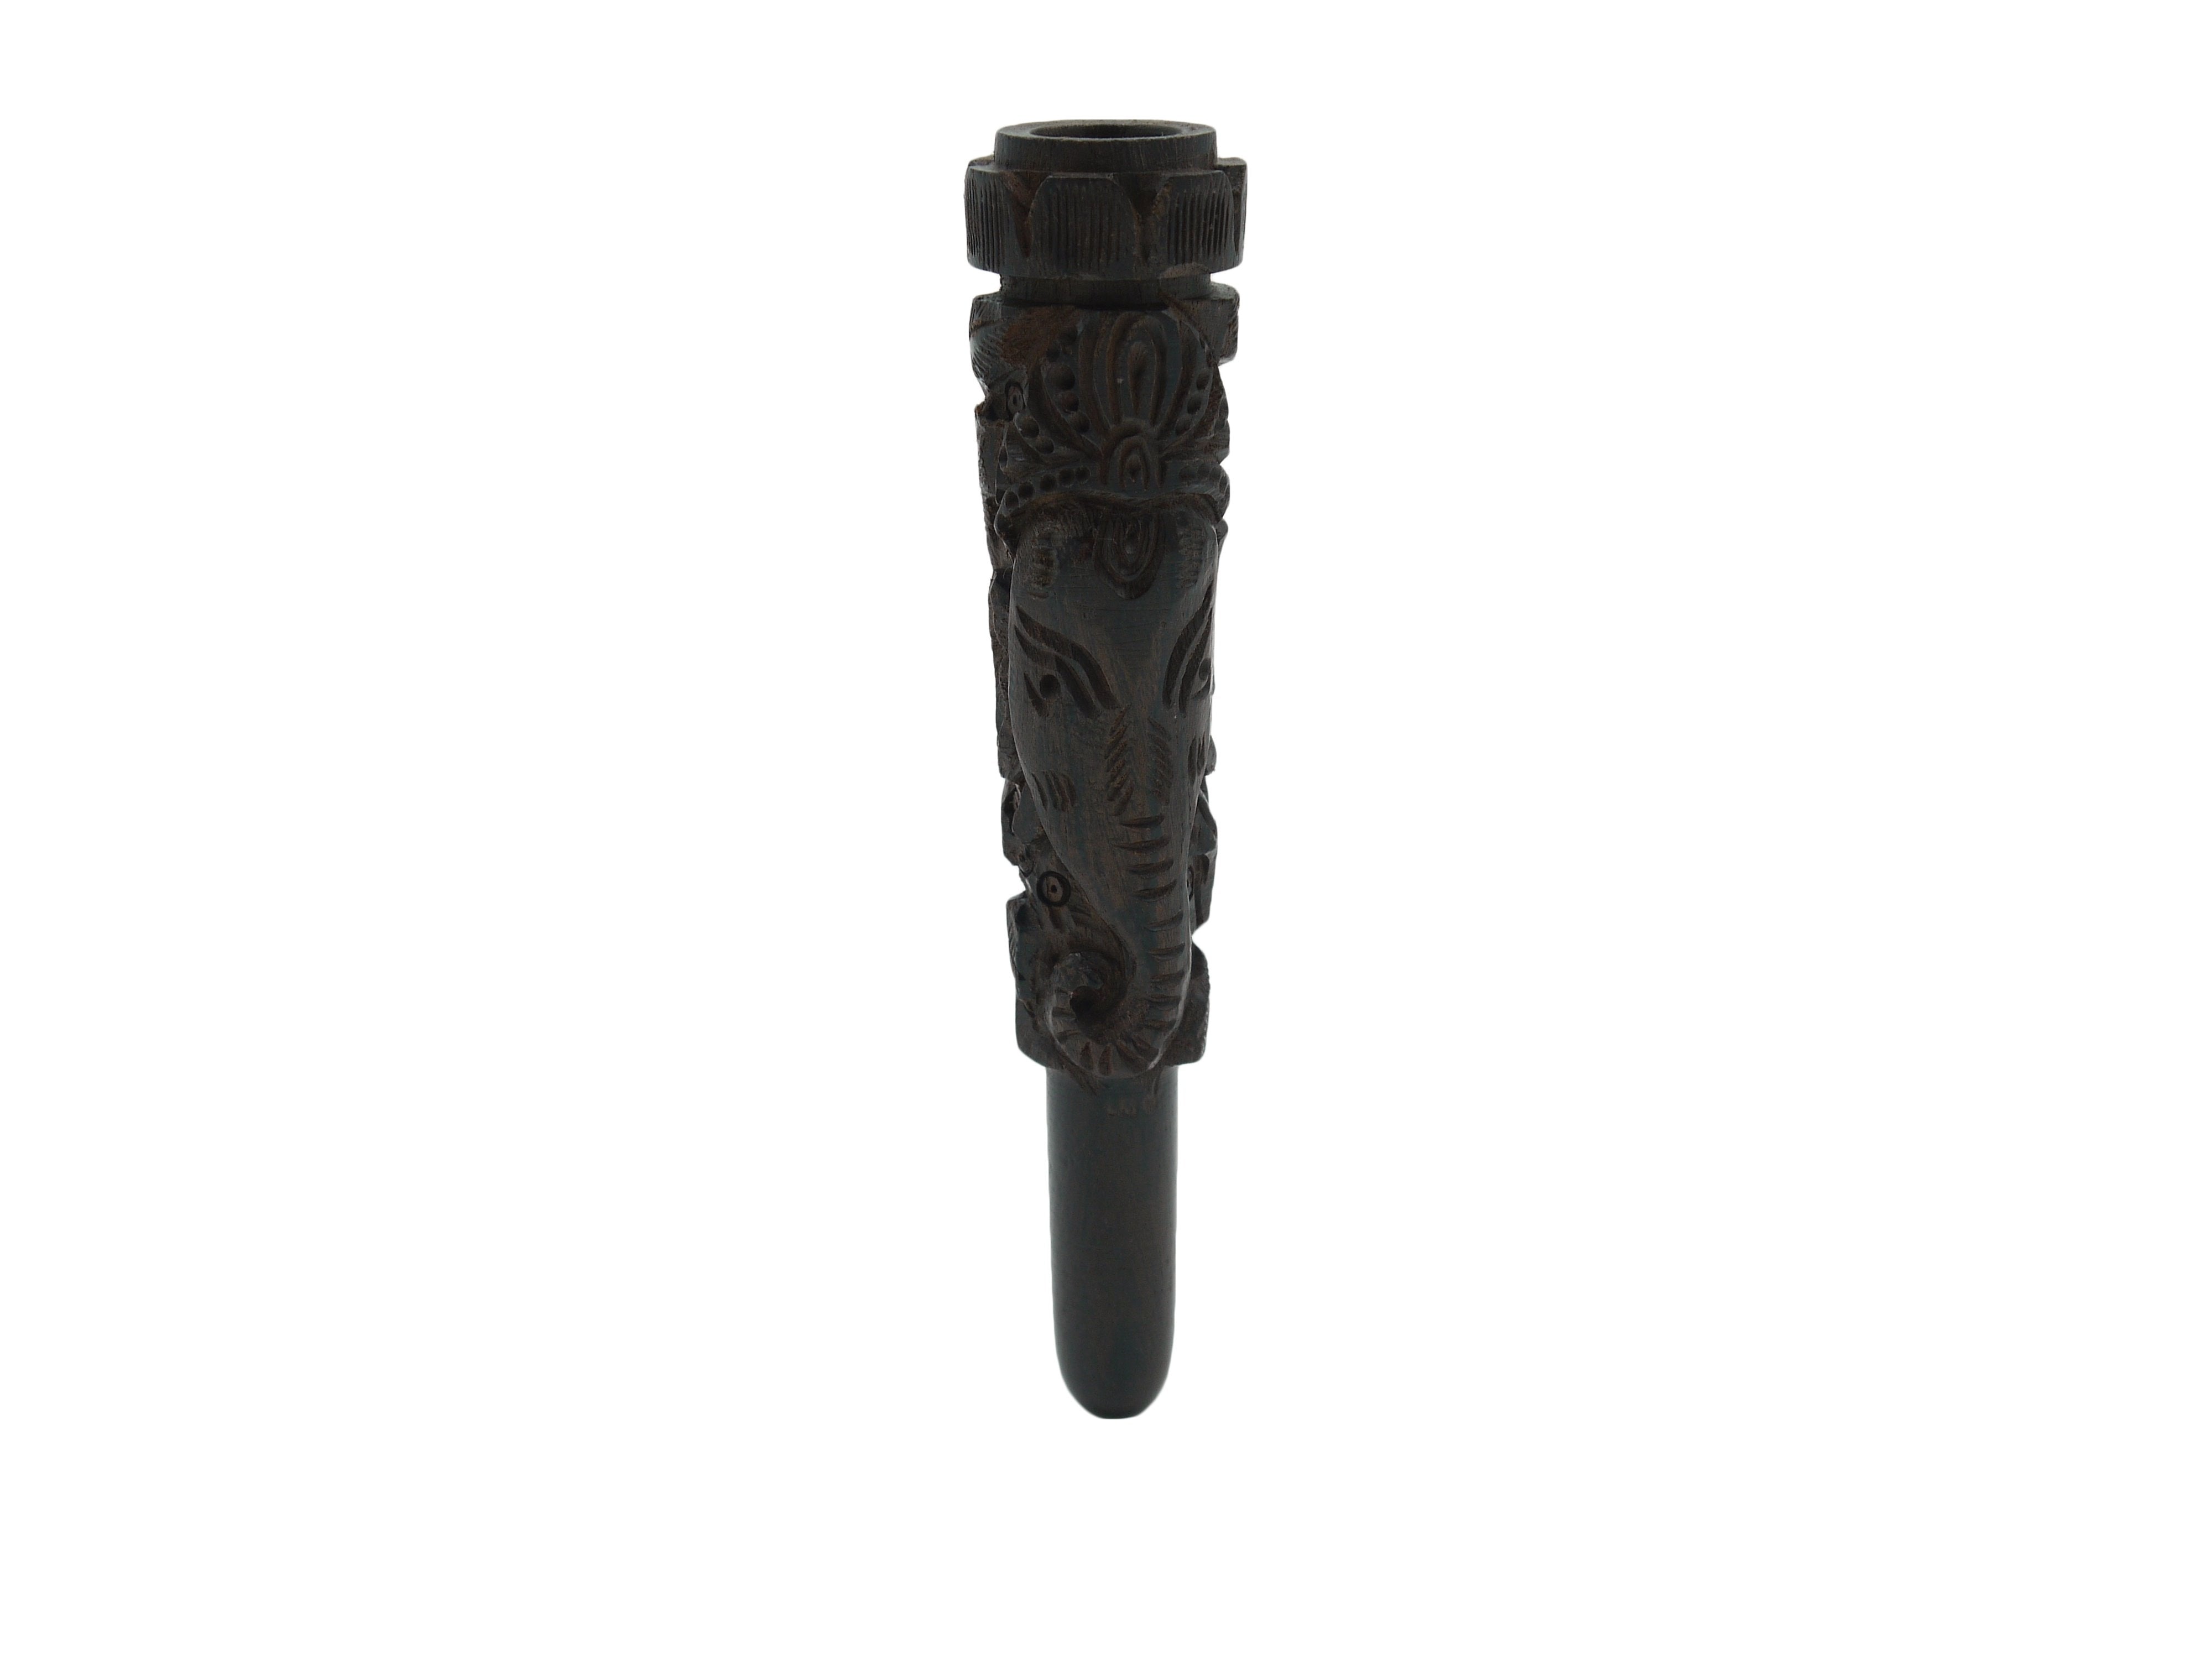 6" Wood Chillum with Ganesh Carving